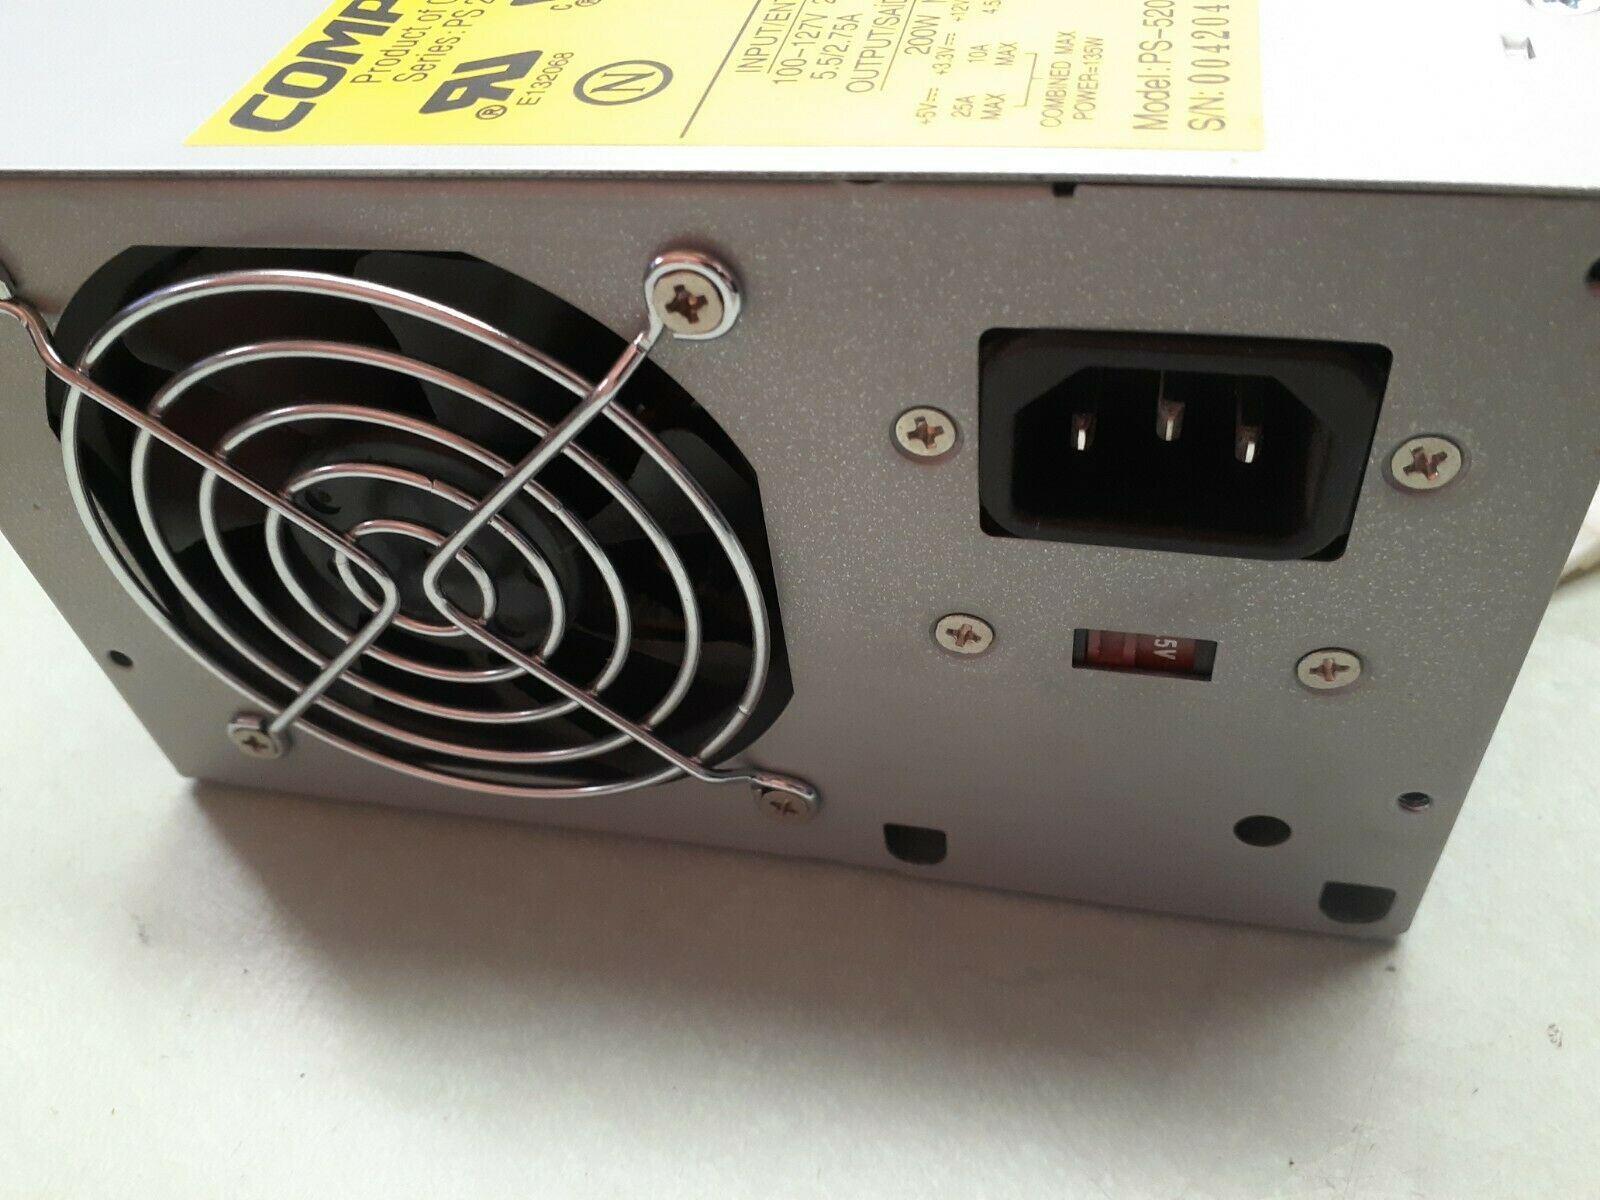 334112 001 PS2013 PS 5201 4T1 334169 001 switching power supply 120 240vac input 45 66hz 4 dc outputs 200 watts